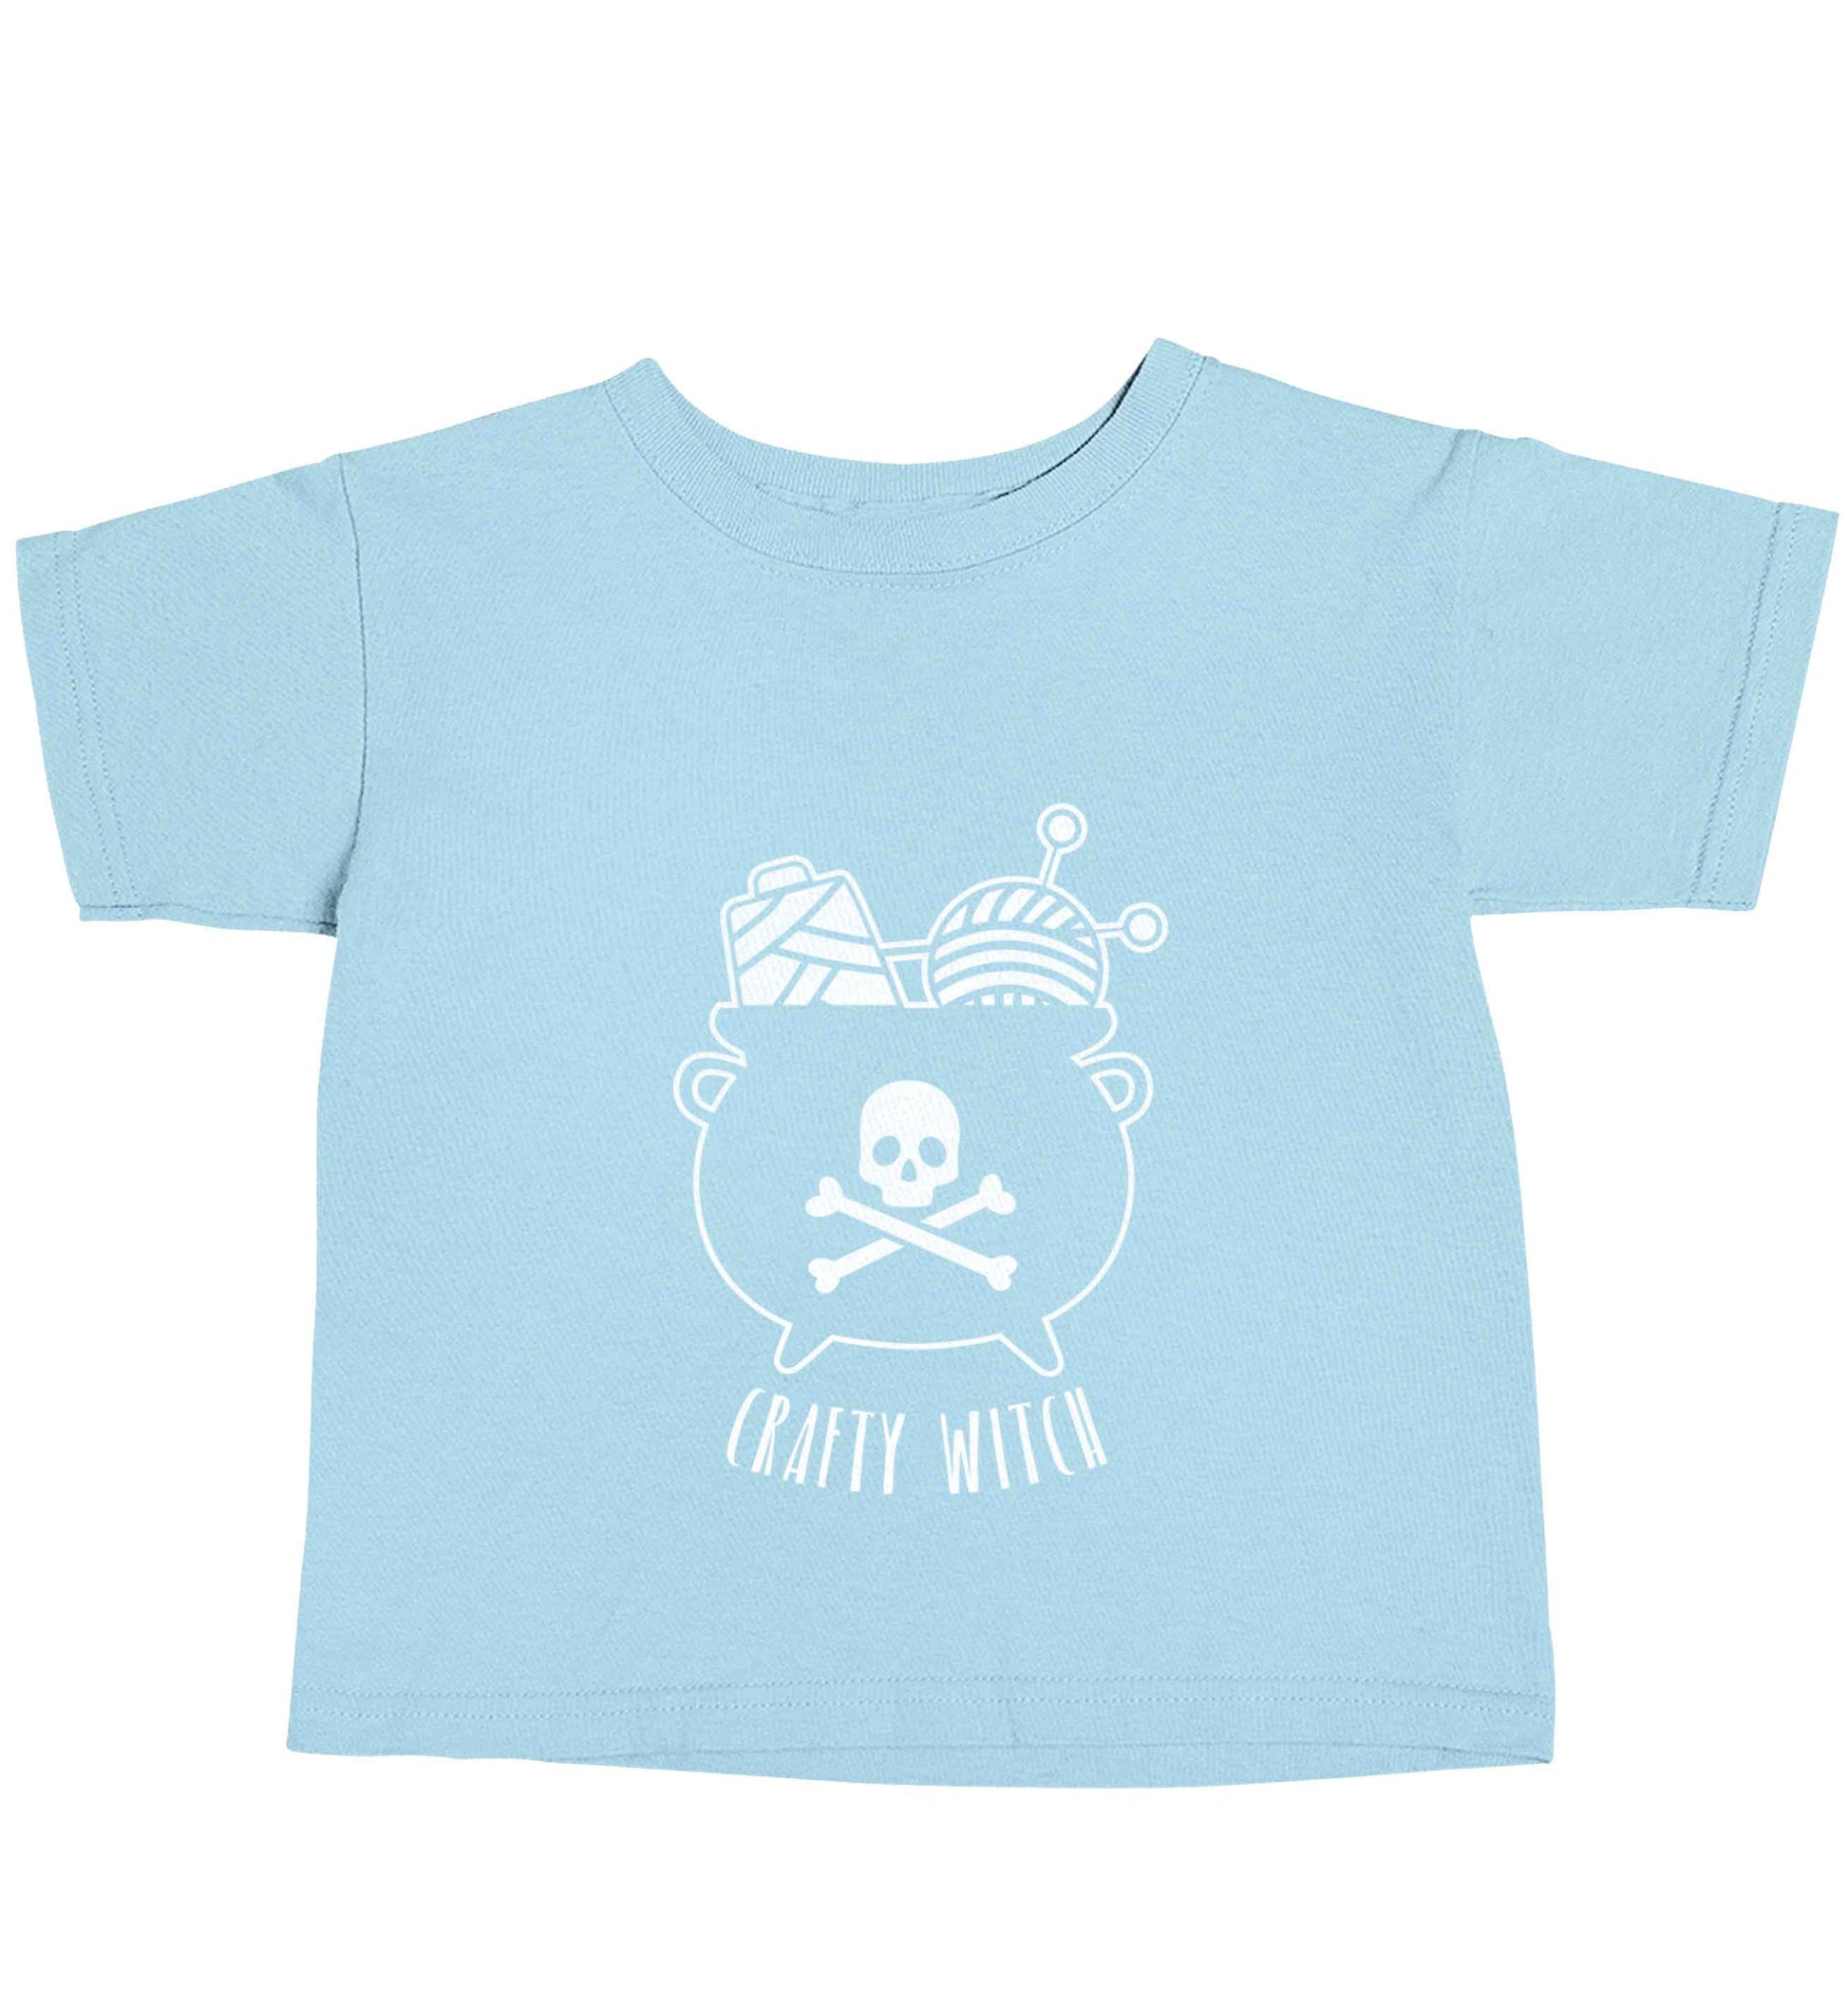 Crafty witch light blue baby toddler Tshirt 2 Years